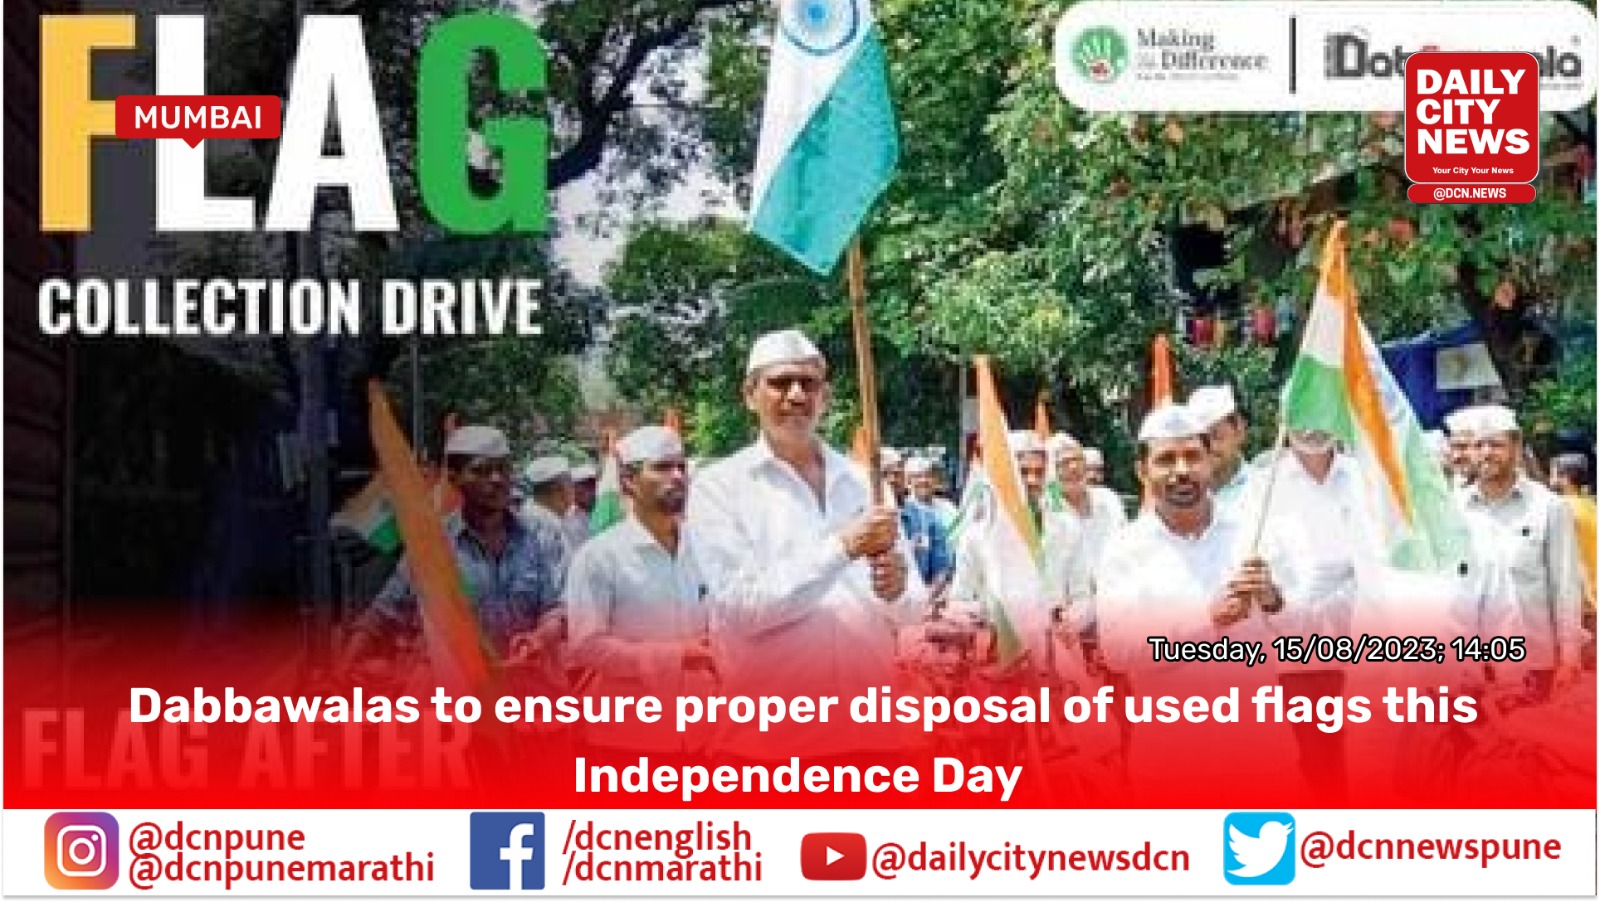 Dabbawalas to ensure proper disposal of used flags this Independence Day